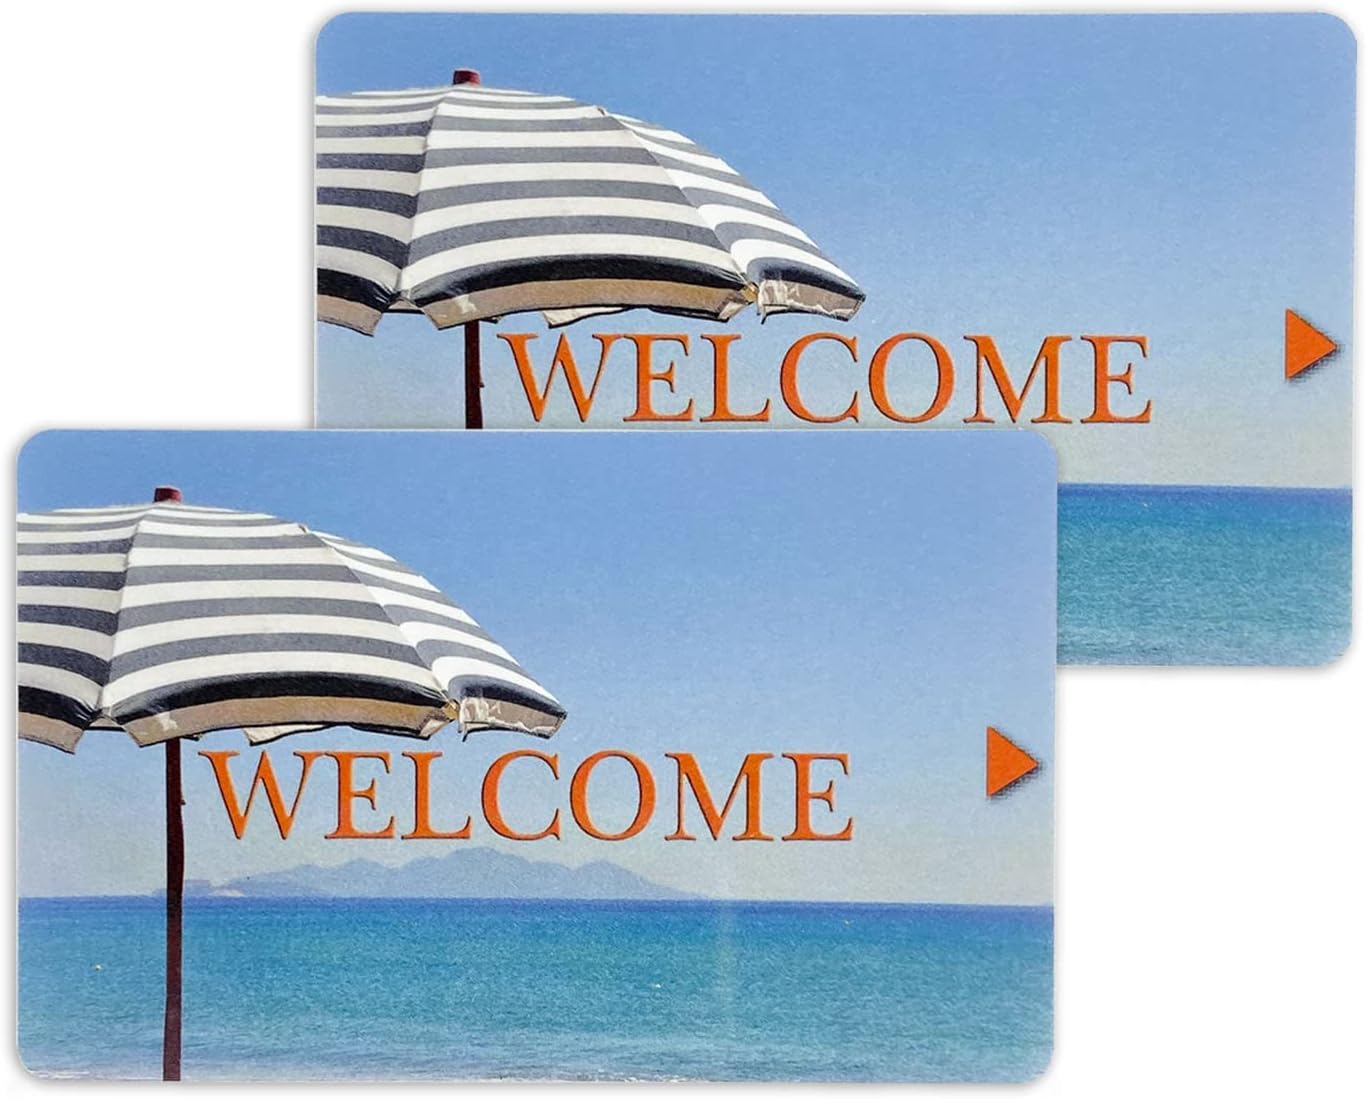 Magnetic Stripe Hotel Key Cards Welcome with Beach Umbrella Design (Set of 500)